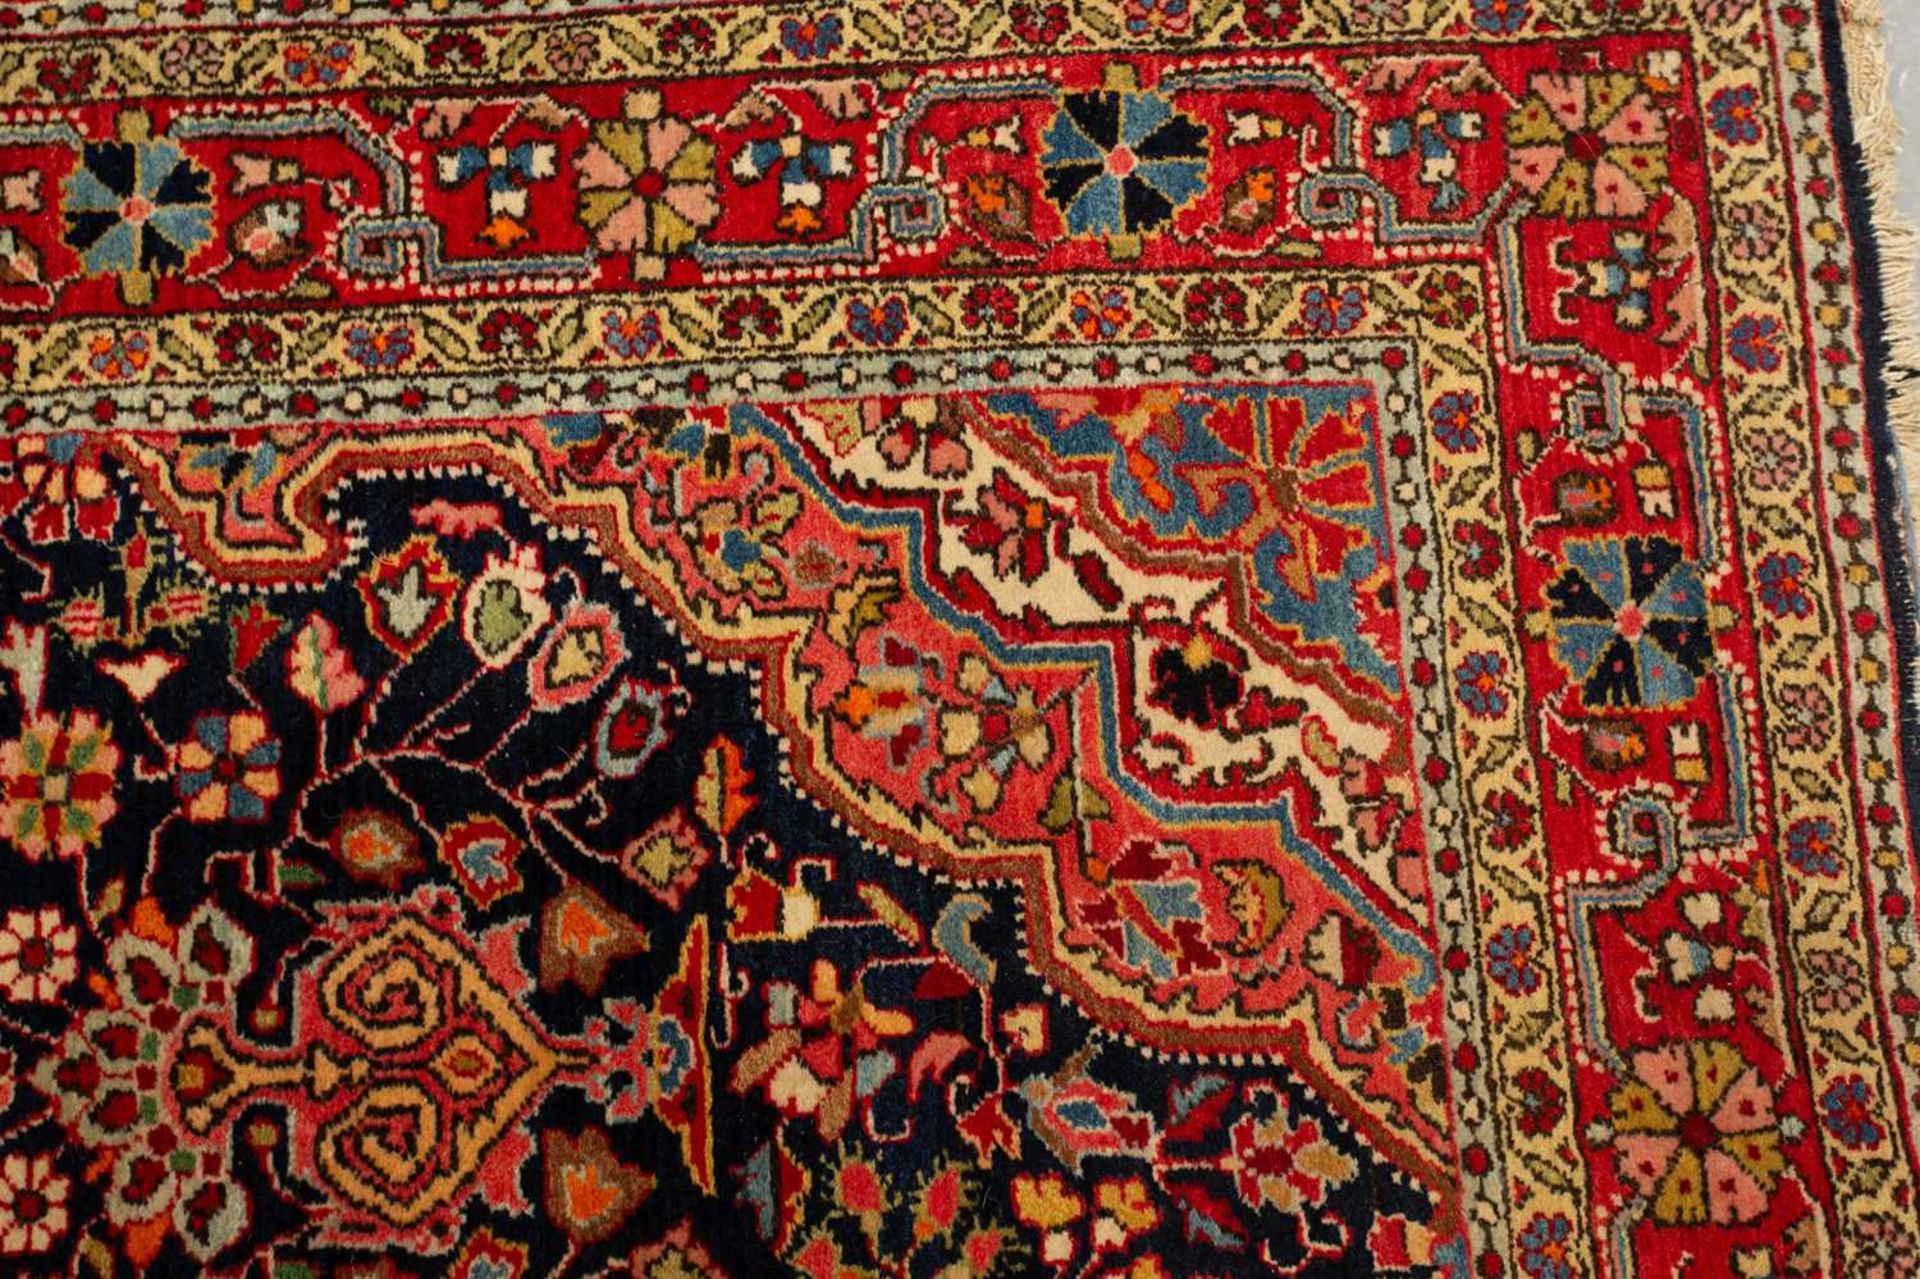 A dark blue ground Baktiari rug, 20th century, with a central lozenge with stylized lanterns - Image 3 of 5